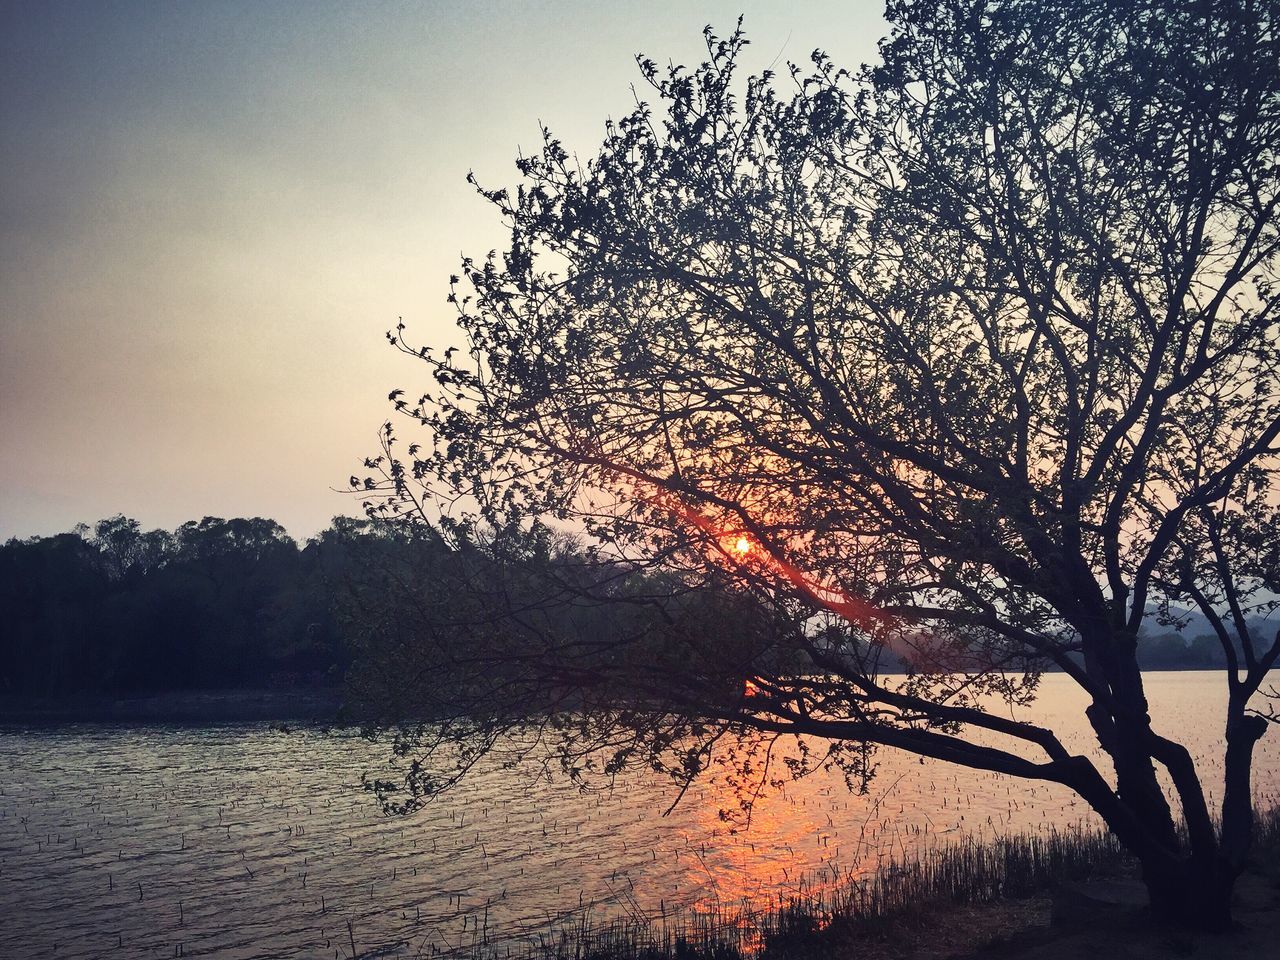 tree, sunset, silhouette, bare tree, tranquility, tranquil scene, water, scenics, branch, beauty in nature, sky, nature, lake, clear sky, idyllic, river, landscape, dusk, outdoors, non-urban scene